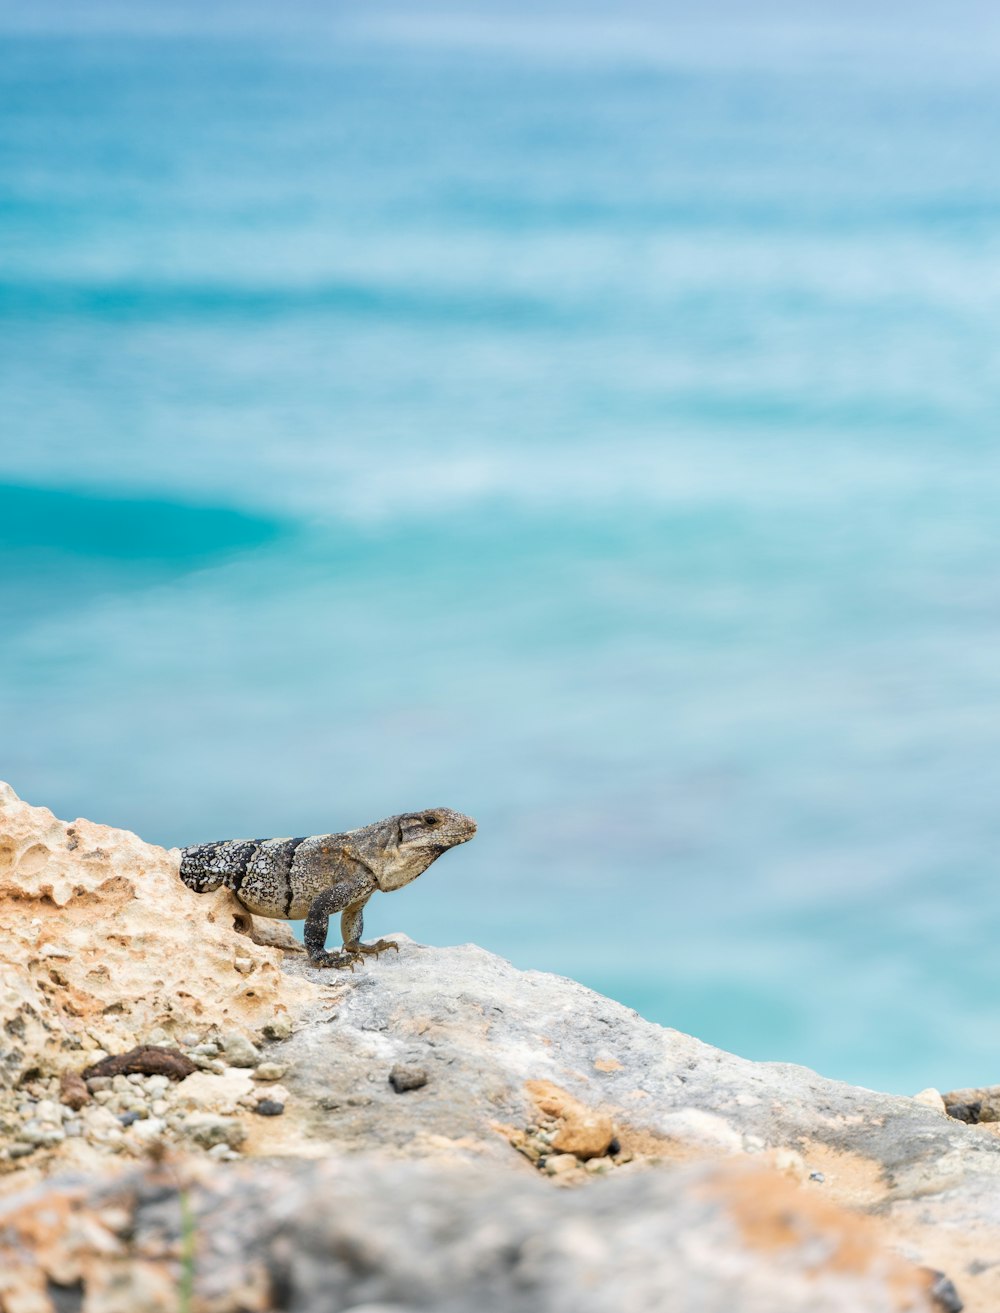 black and white lizard on rock near body of water during daytime